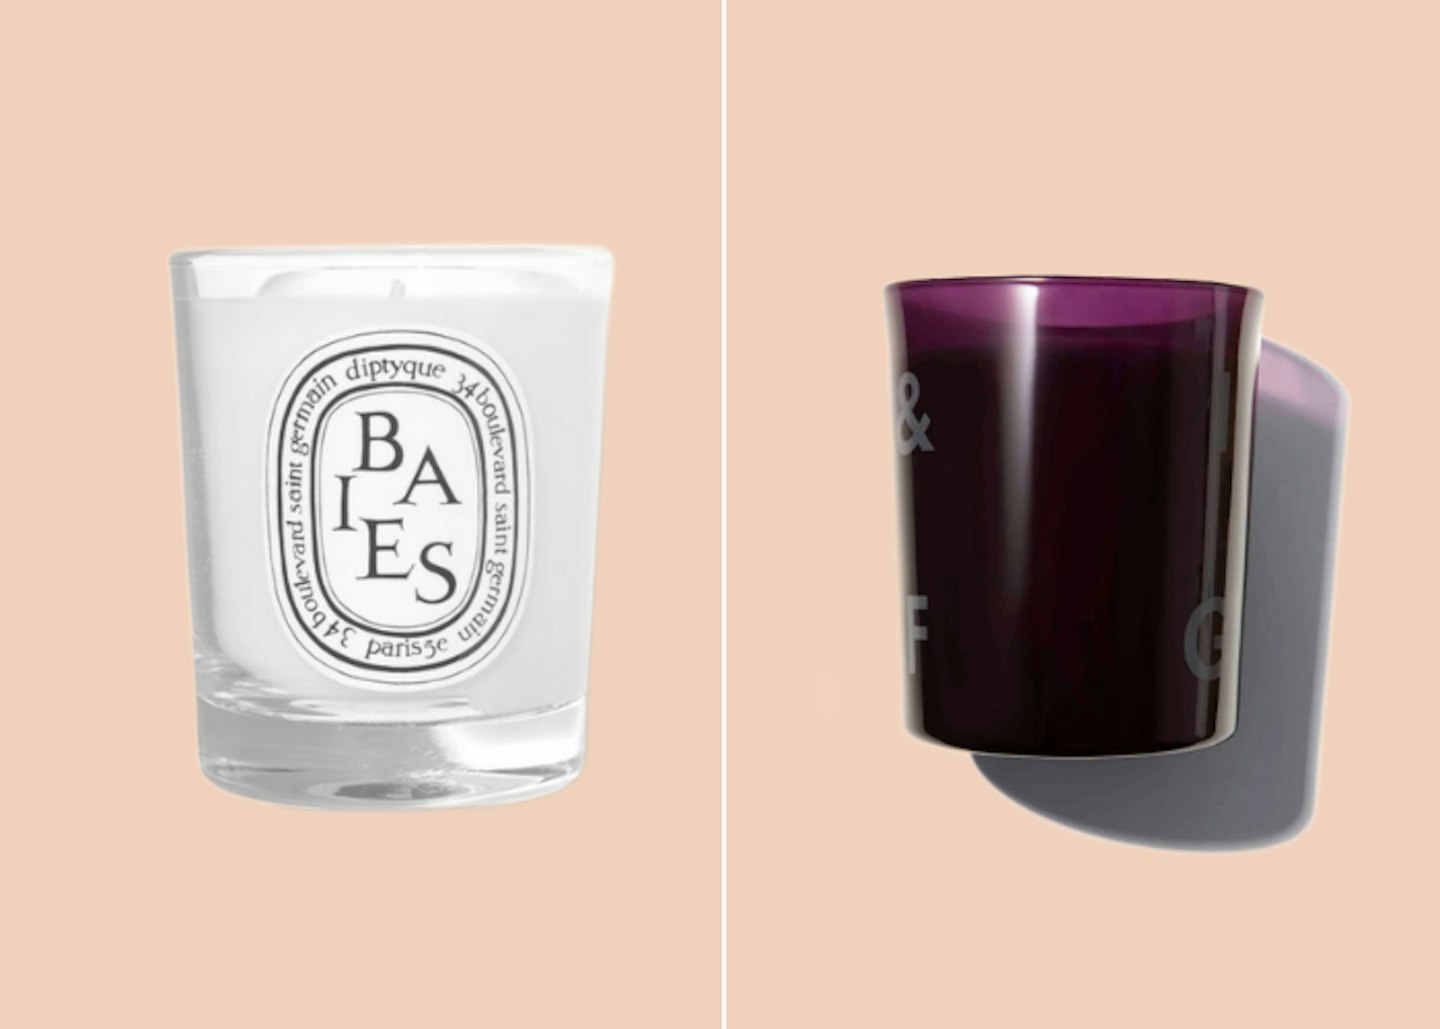 Diptyque Baies Candle & Beauty Pie Redcurrant & Fig Scented Candle